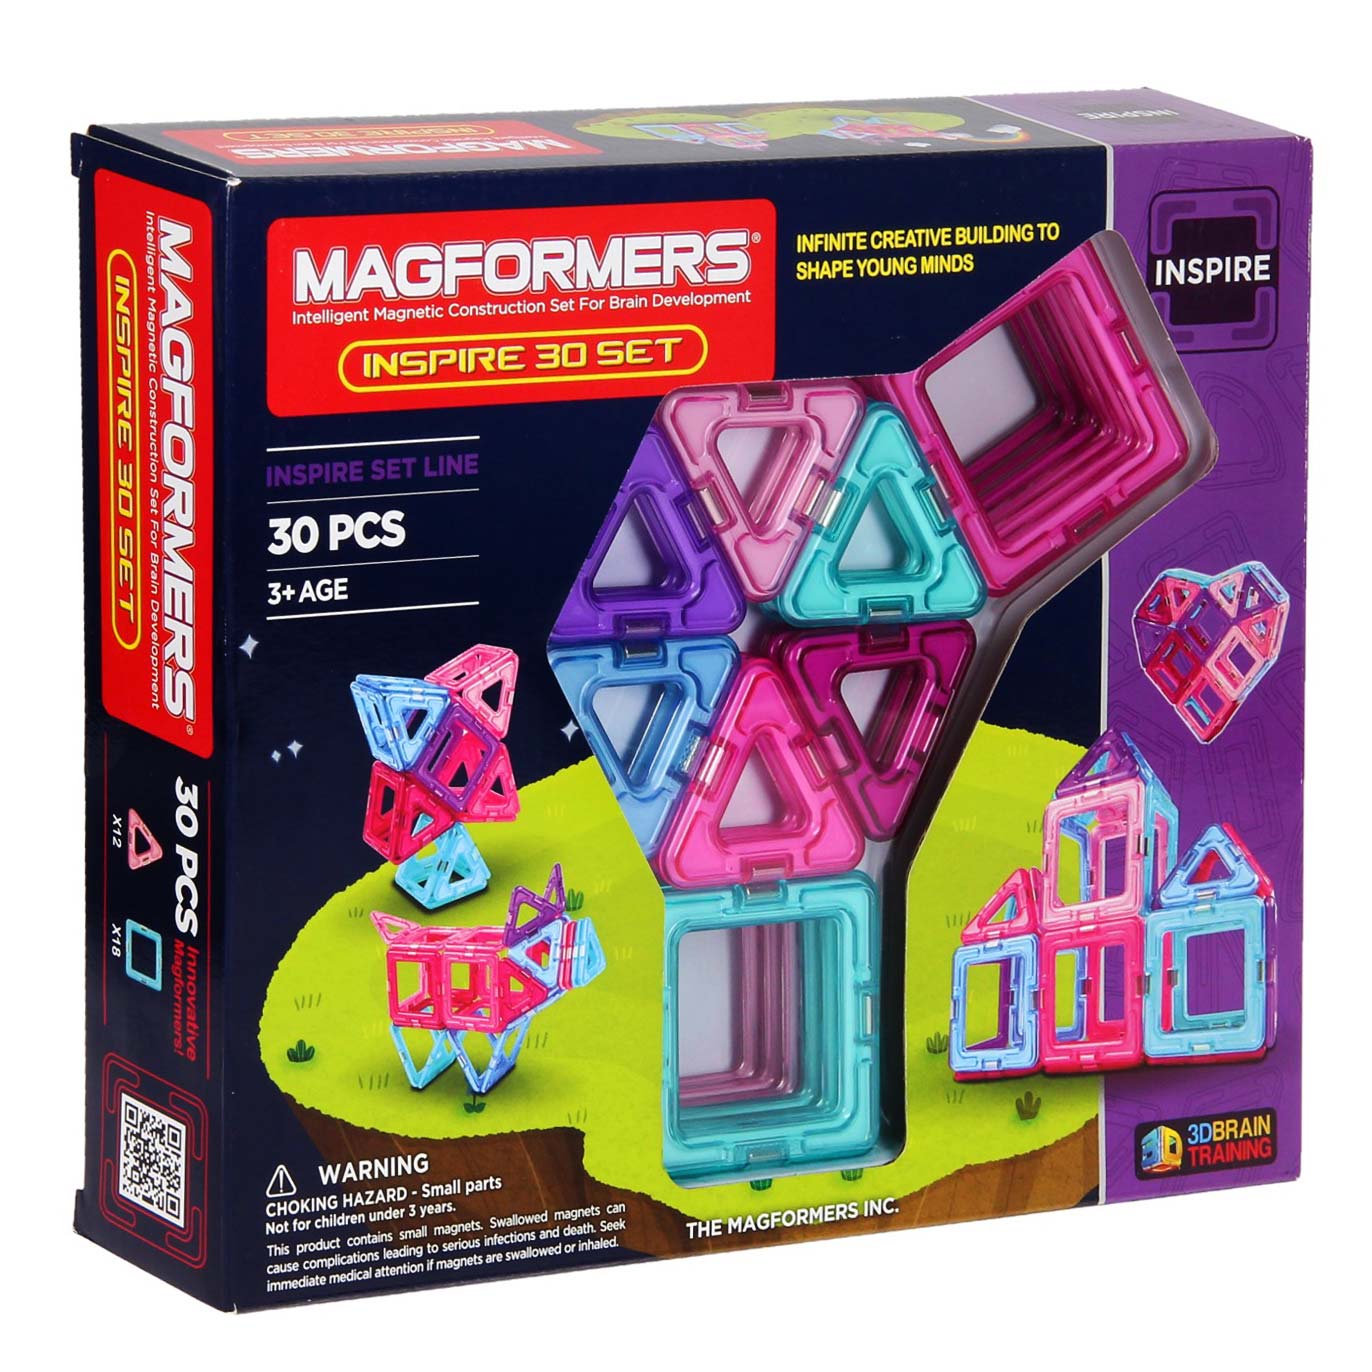 Magformers Inspire